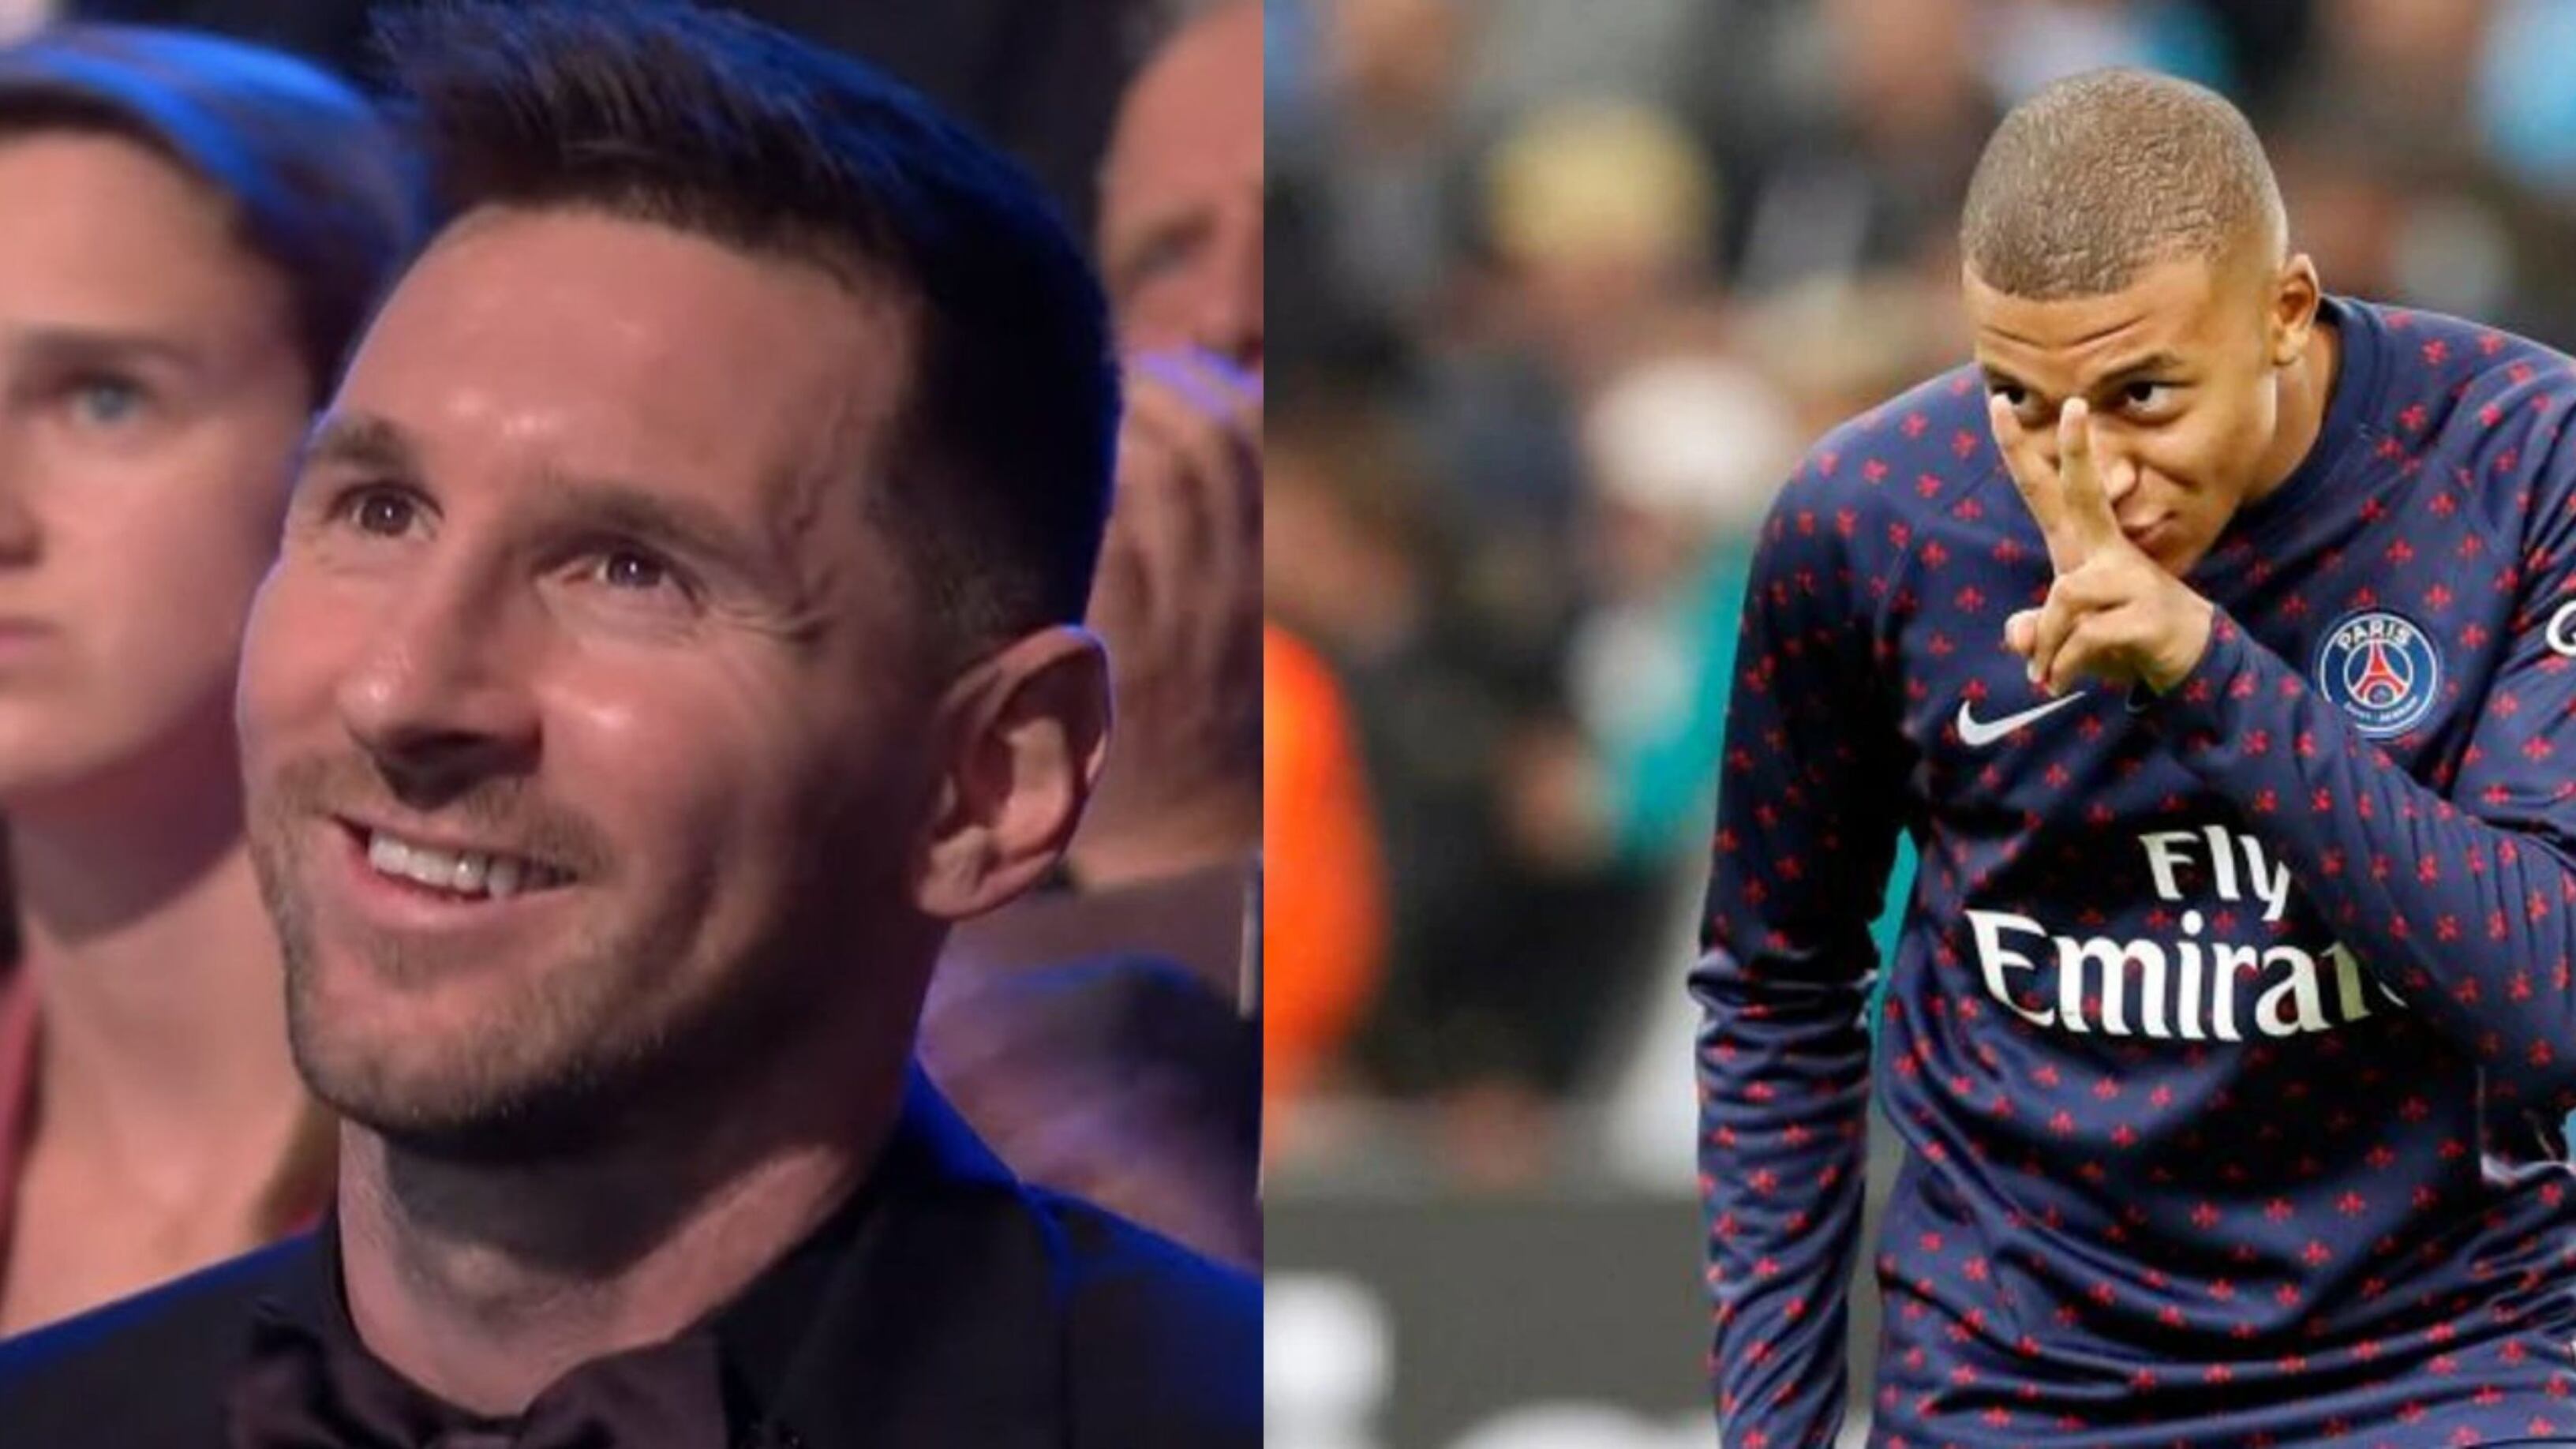 Mbappe and Ronaldo have never done something like this, Messi's gesture of humility